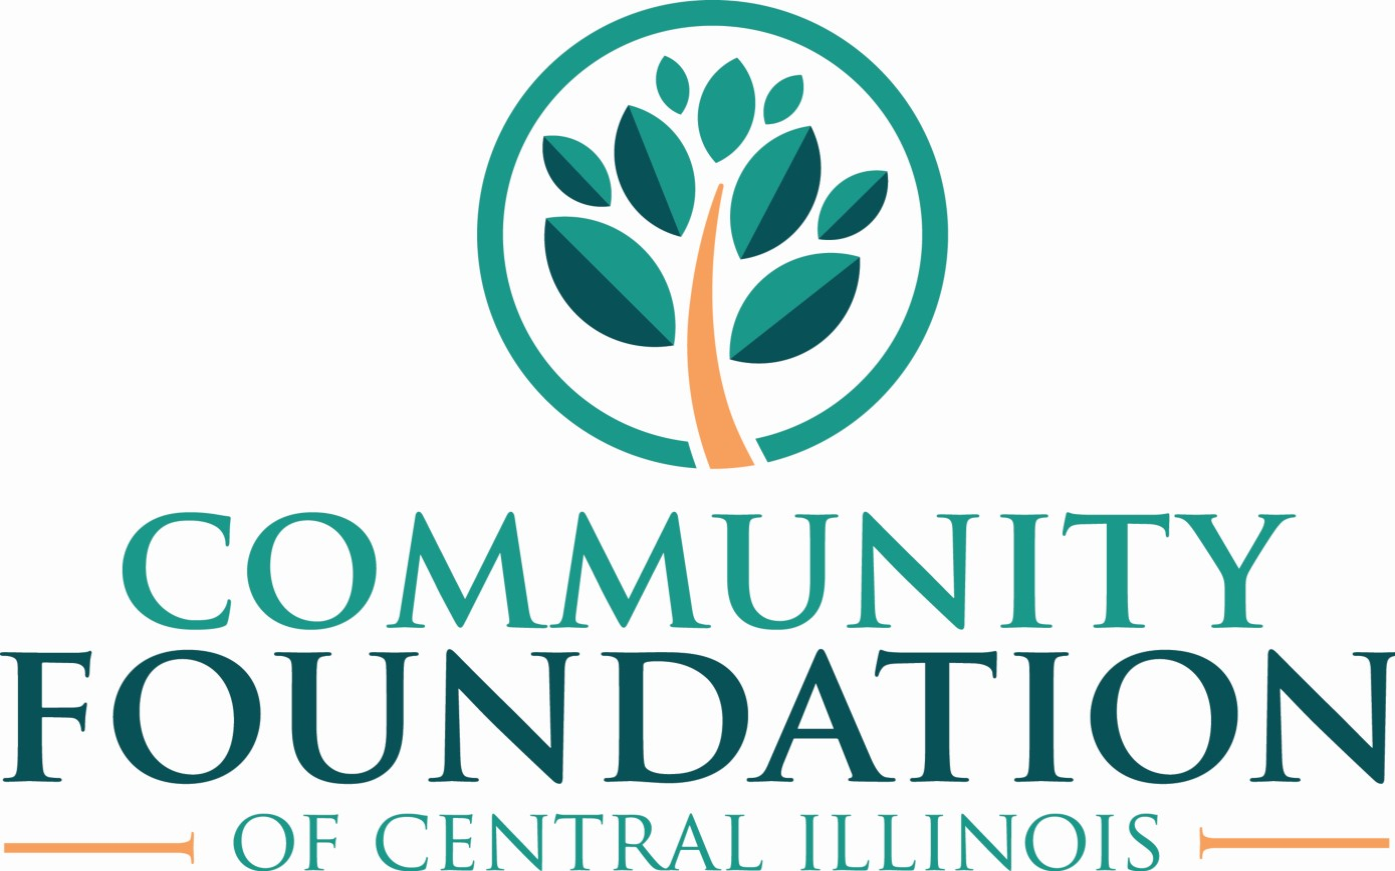 Community Foundation Awards $40,000 to Address Food Insecurity